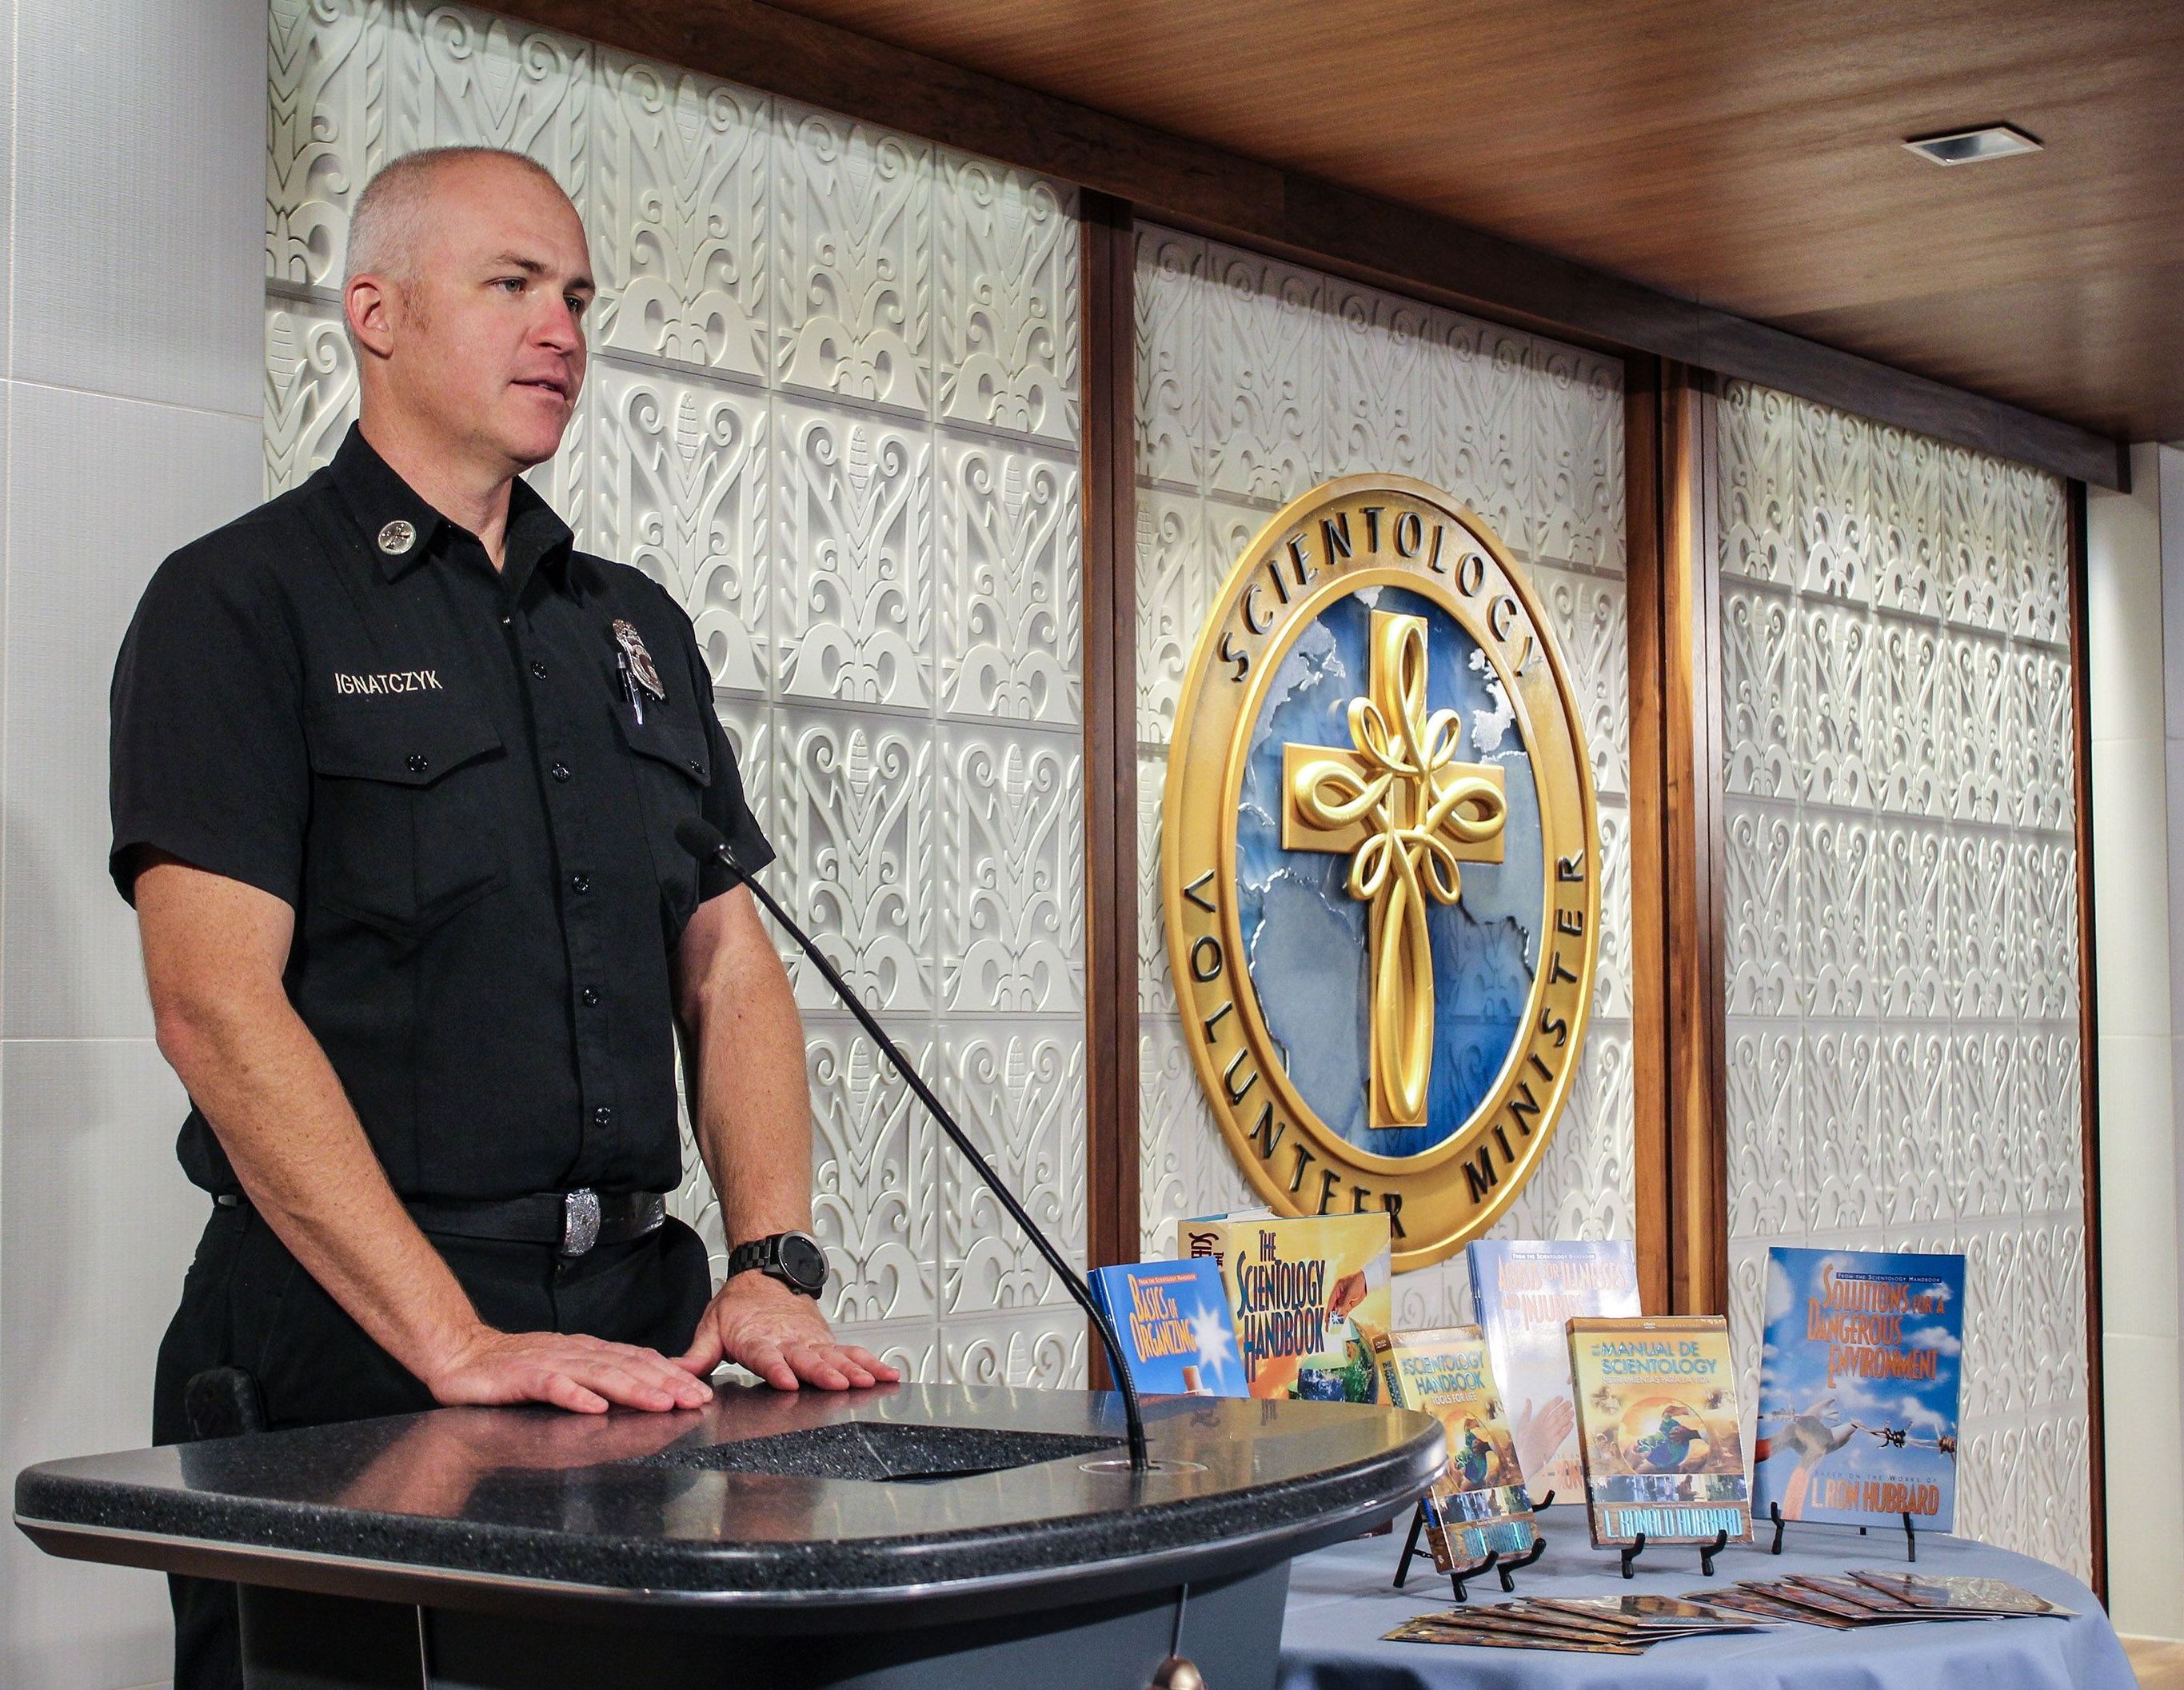 A seminar on how to prepare for “The Big One” was presented by a Los Angeles Fire Department captain at the World Civil Defense Day Expo and Open House at the Church of Scientology of Los Angeles.